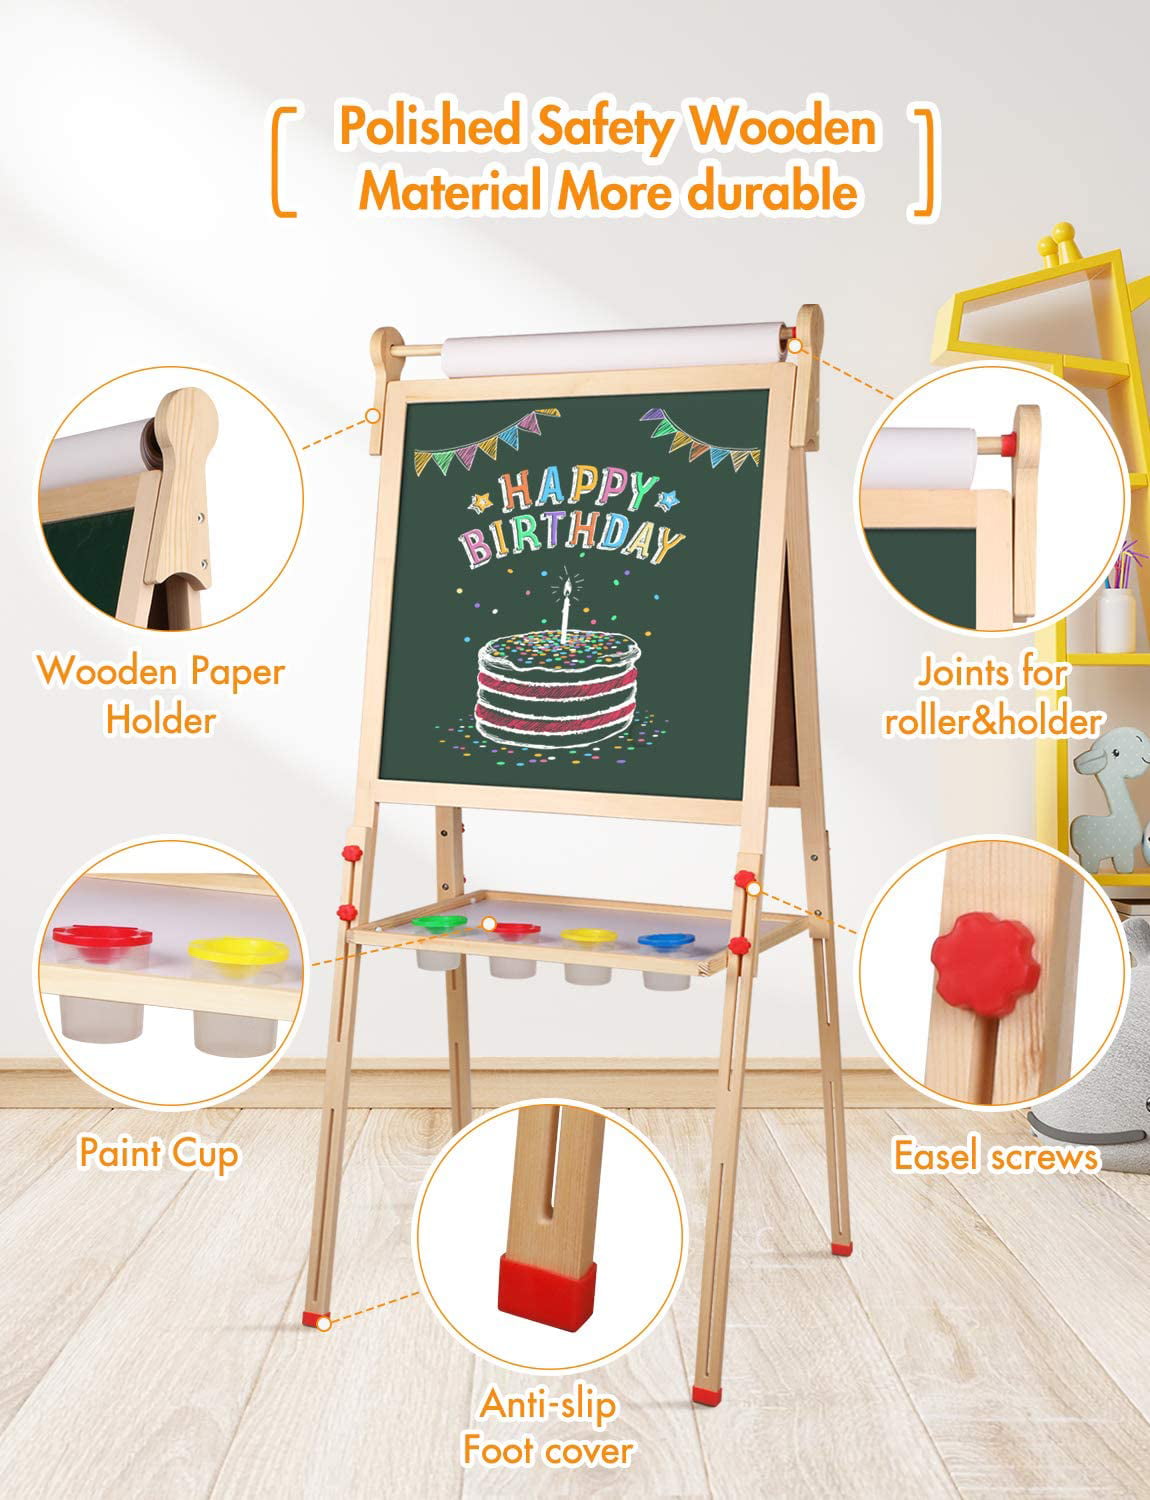 YOHOOLYO Kids Wooden Art Easel with Paper Roll Double Sided Whiteboard Chalkboard Children Easel,Adjustable Height Magnetic Dry Easel Drawing with Kids Art Easel Playset for Boys Girls Gifts